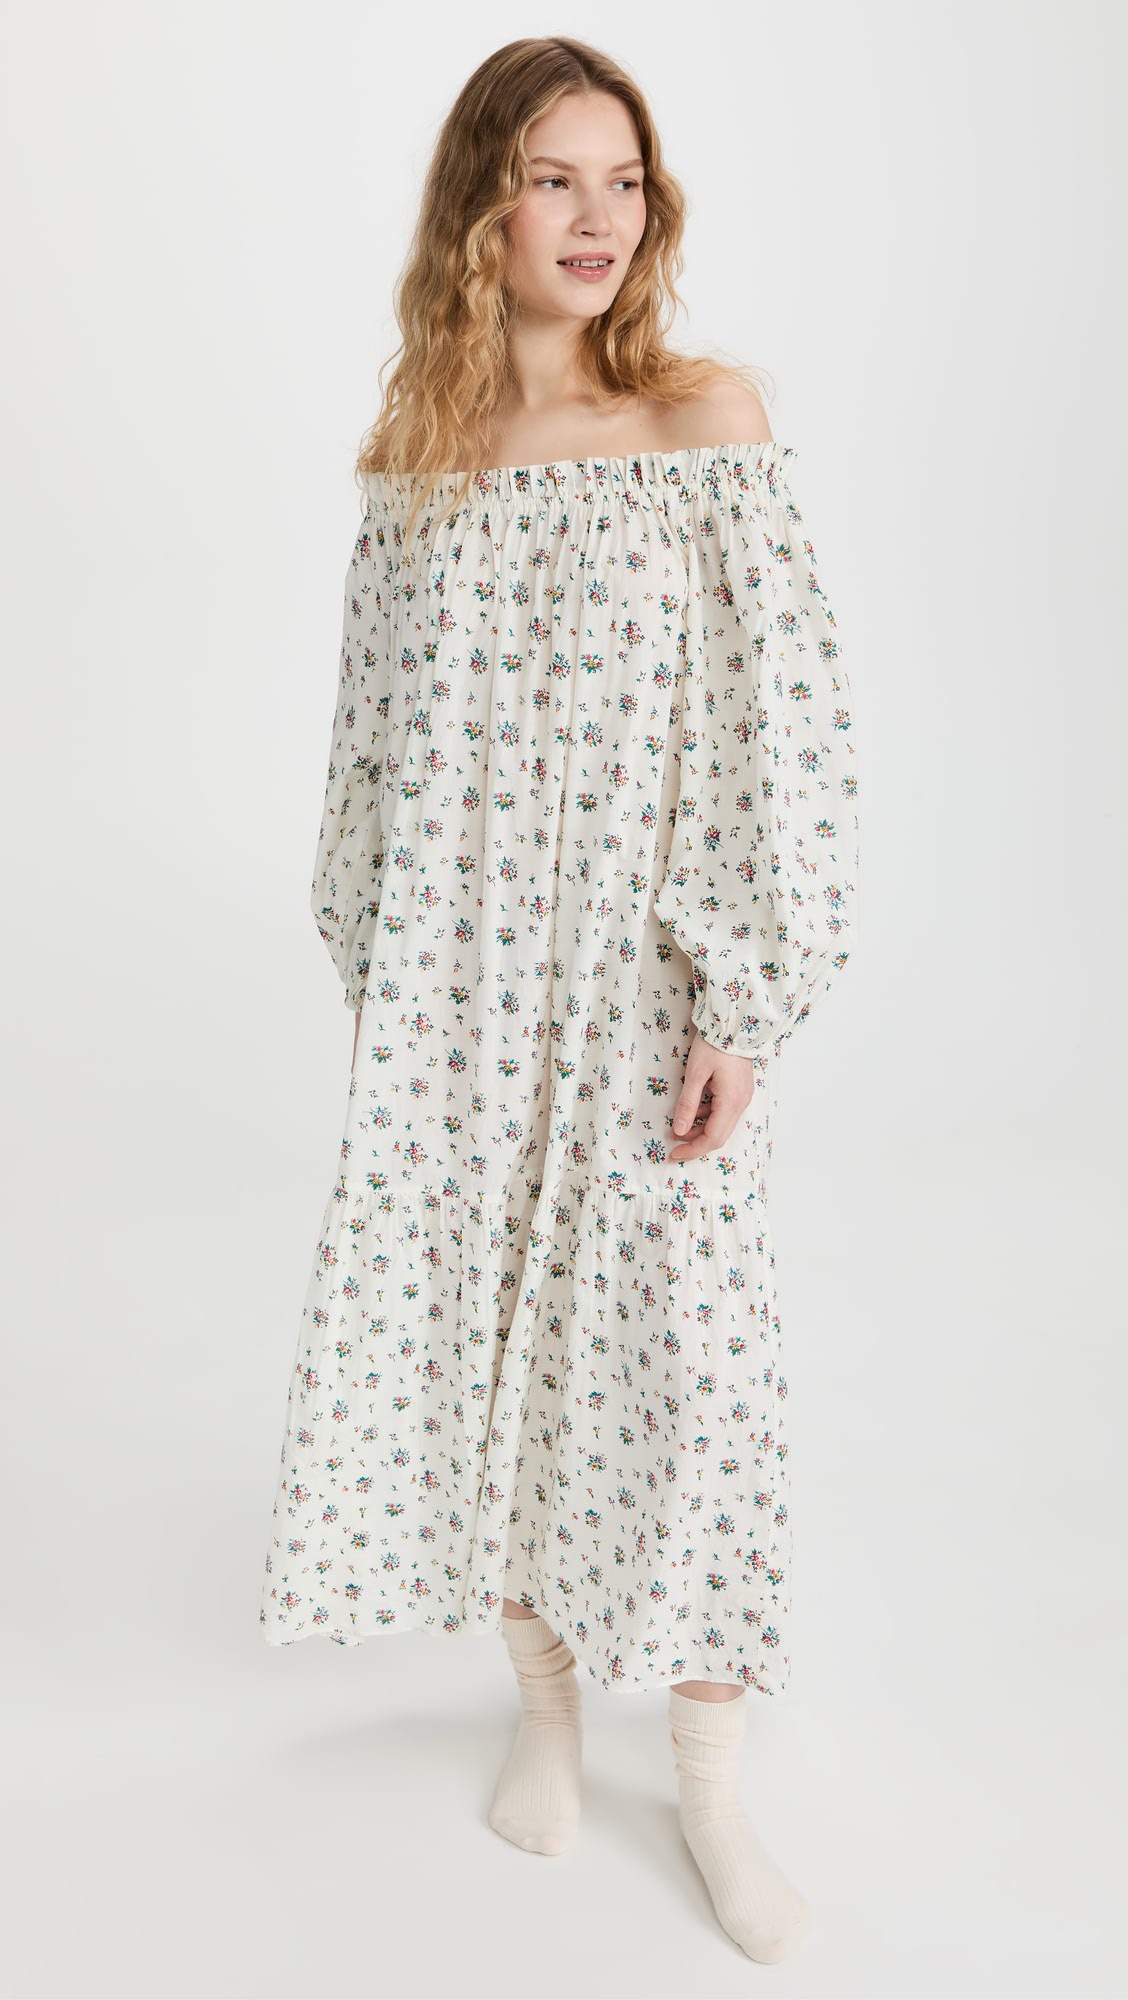 The 30 Best Nightgowns That Are Editor-Approved | Who What Wear